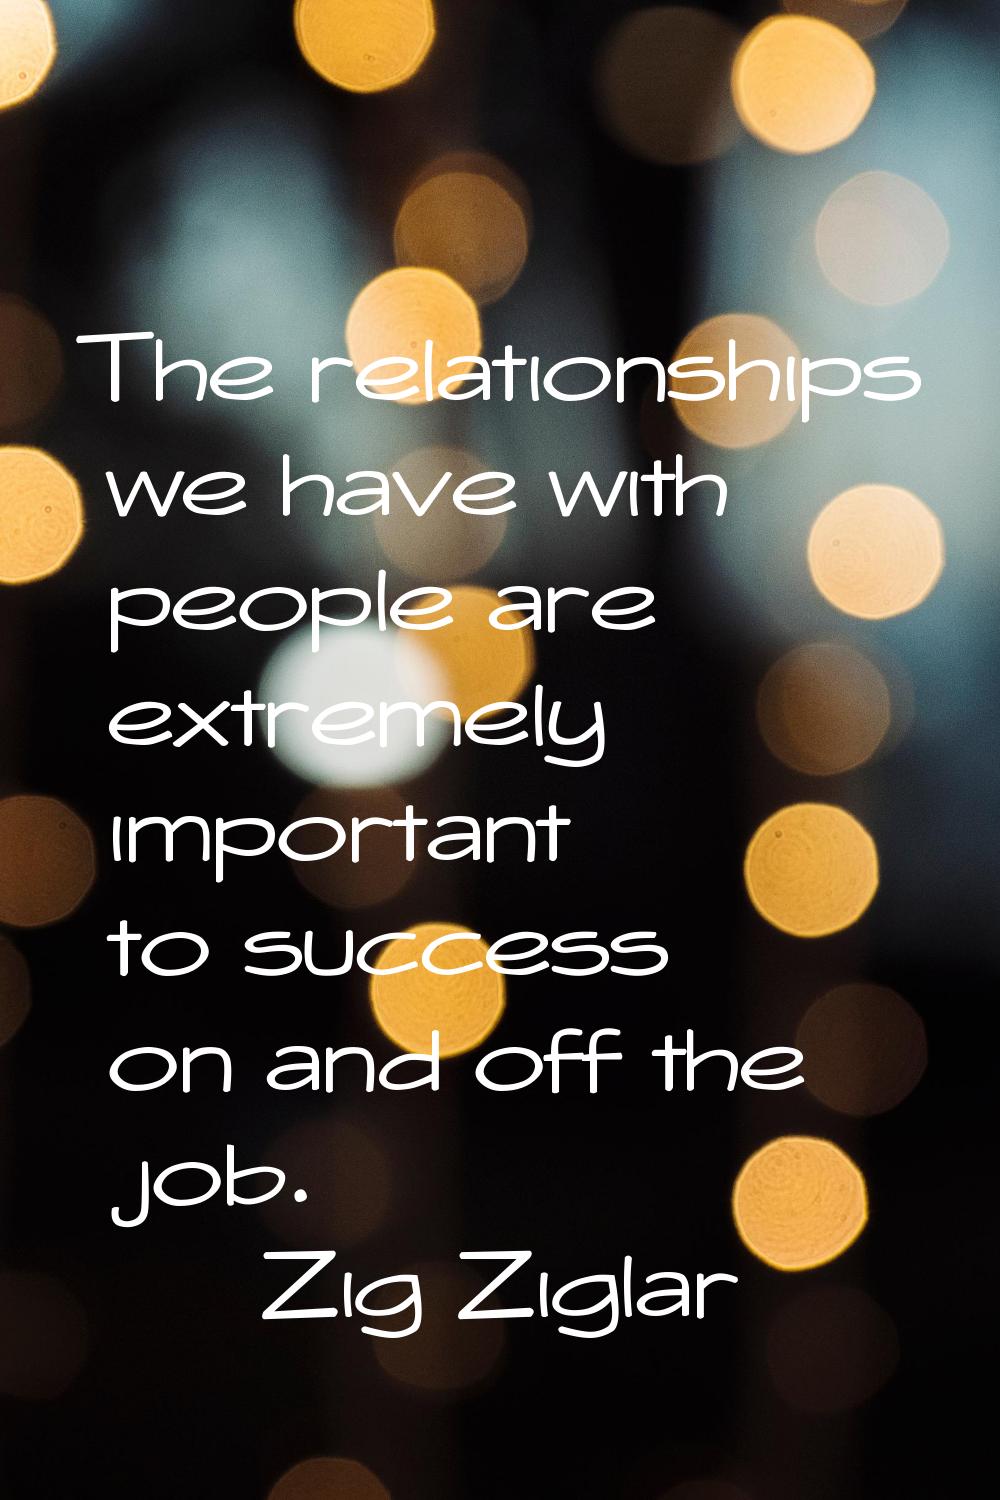 The relationships we have with people are extremely important to success on and off the job.